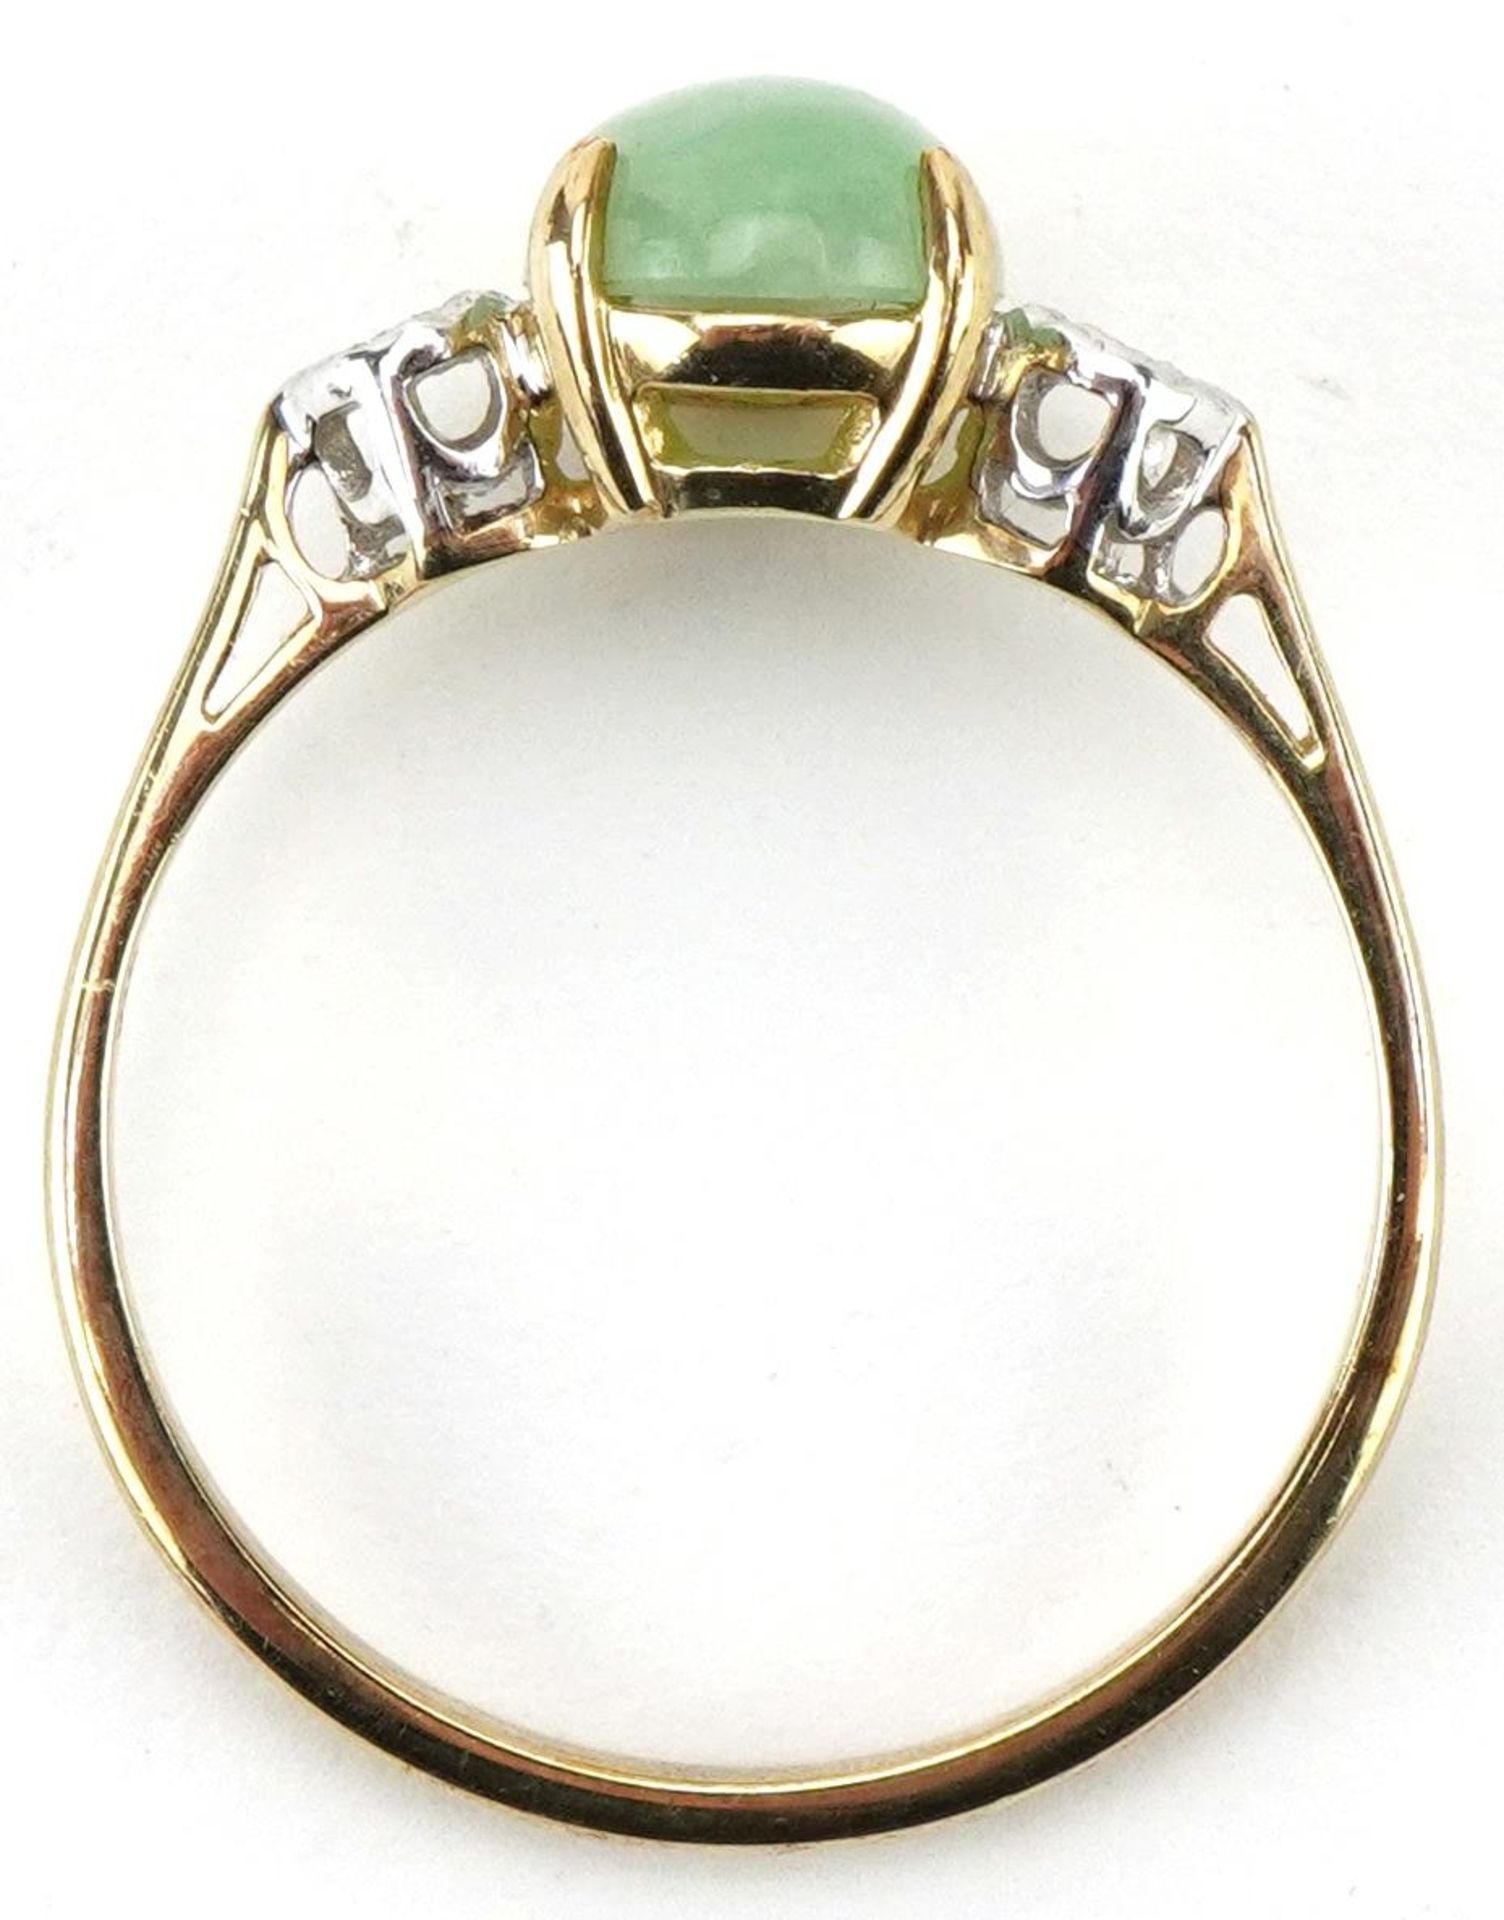 9ct gold cabochon green stone and diamond three stone ring, size Q, 2.2g - Image 3 of 5